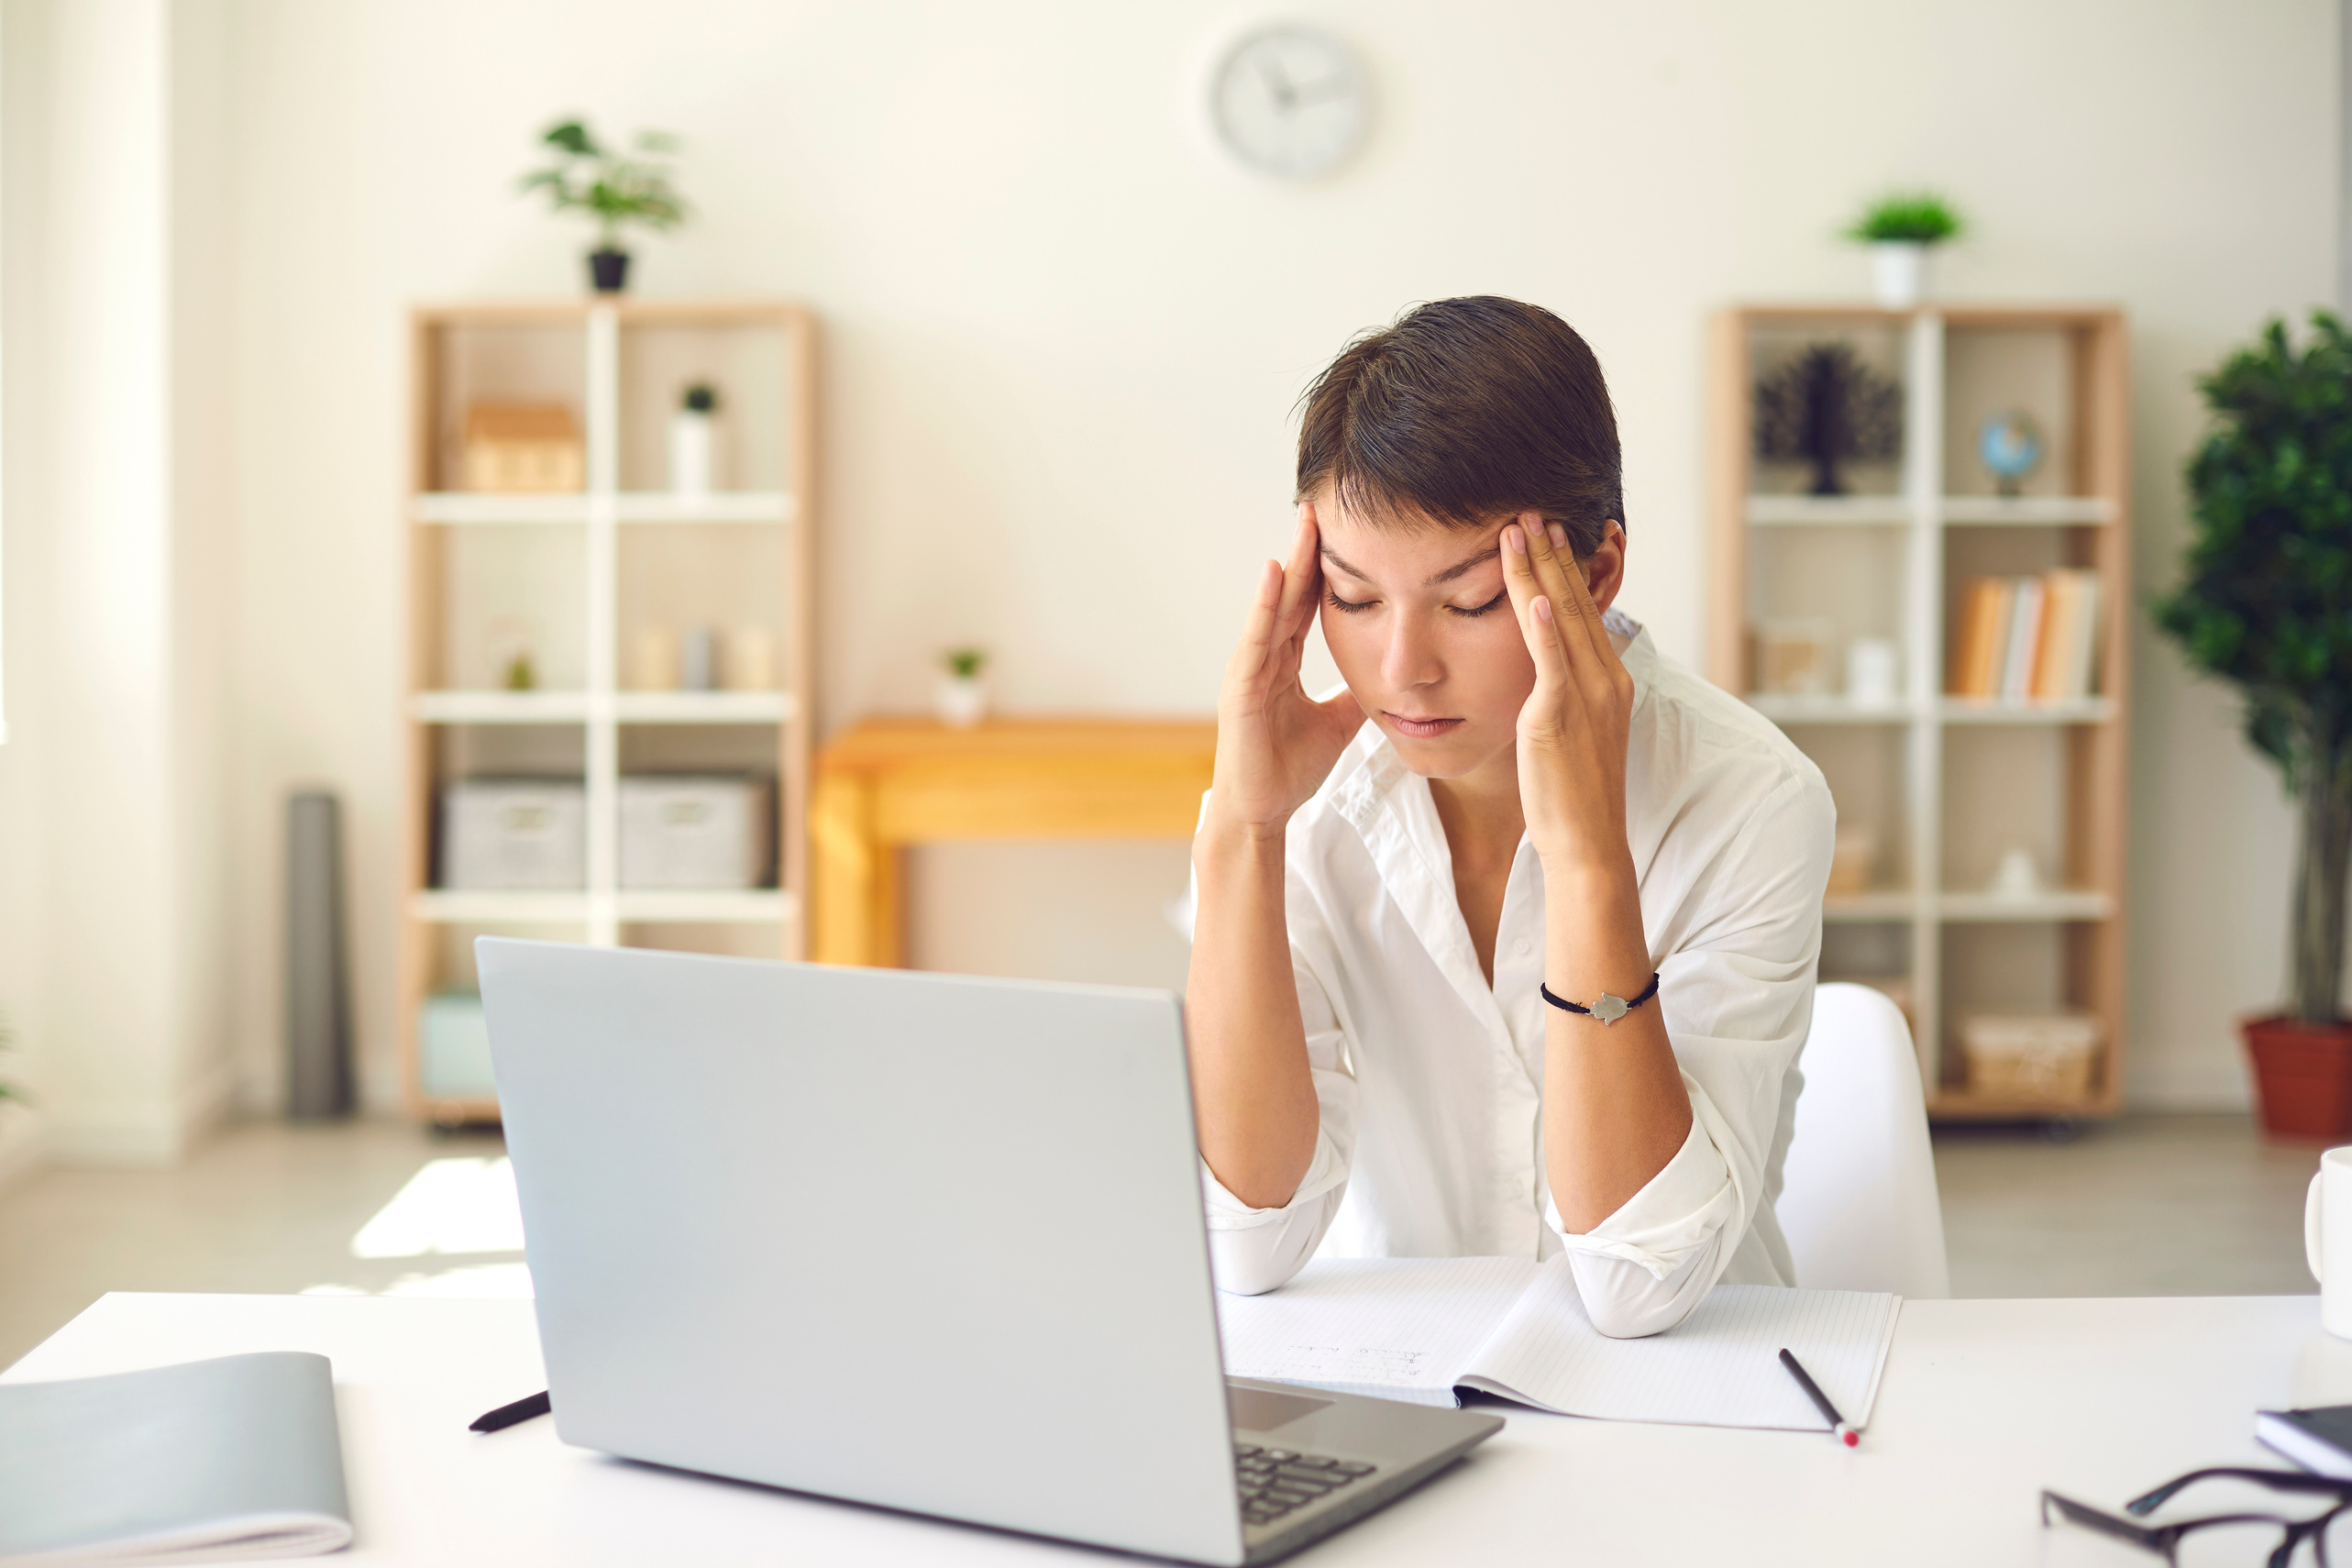 Tired Woman with Bad Headache or Blurry Vision Massaging Temples Sitting at Desk with Laptop